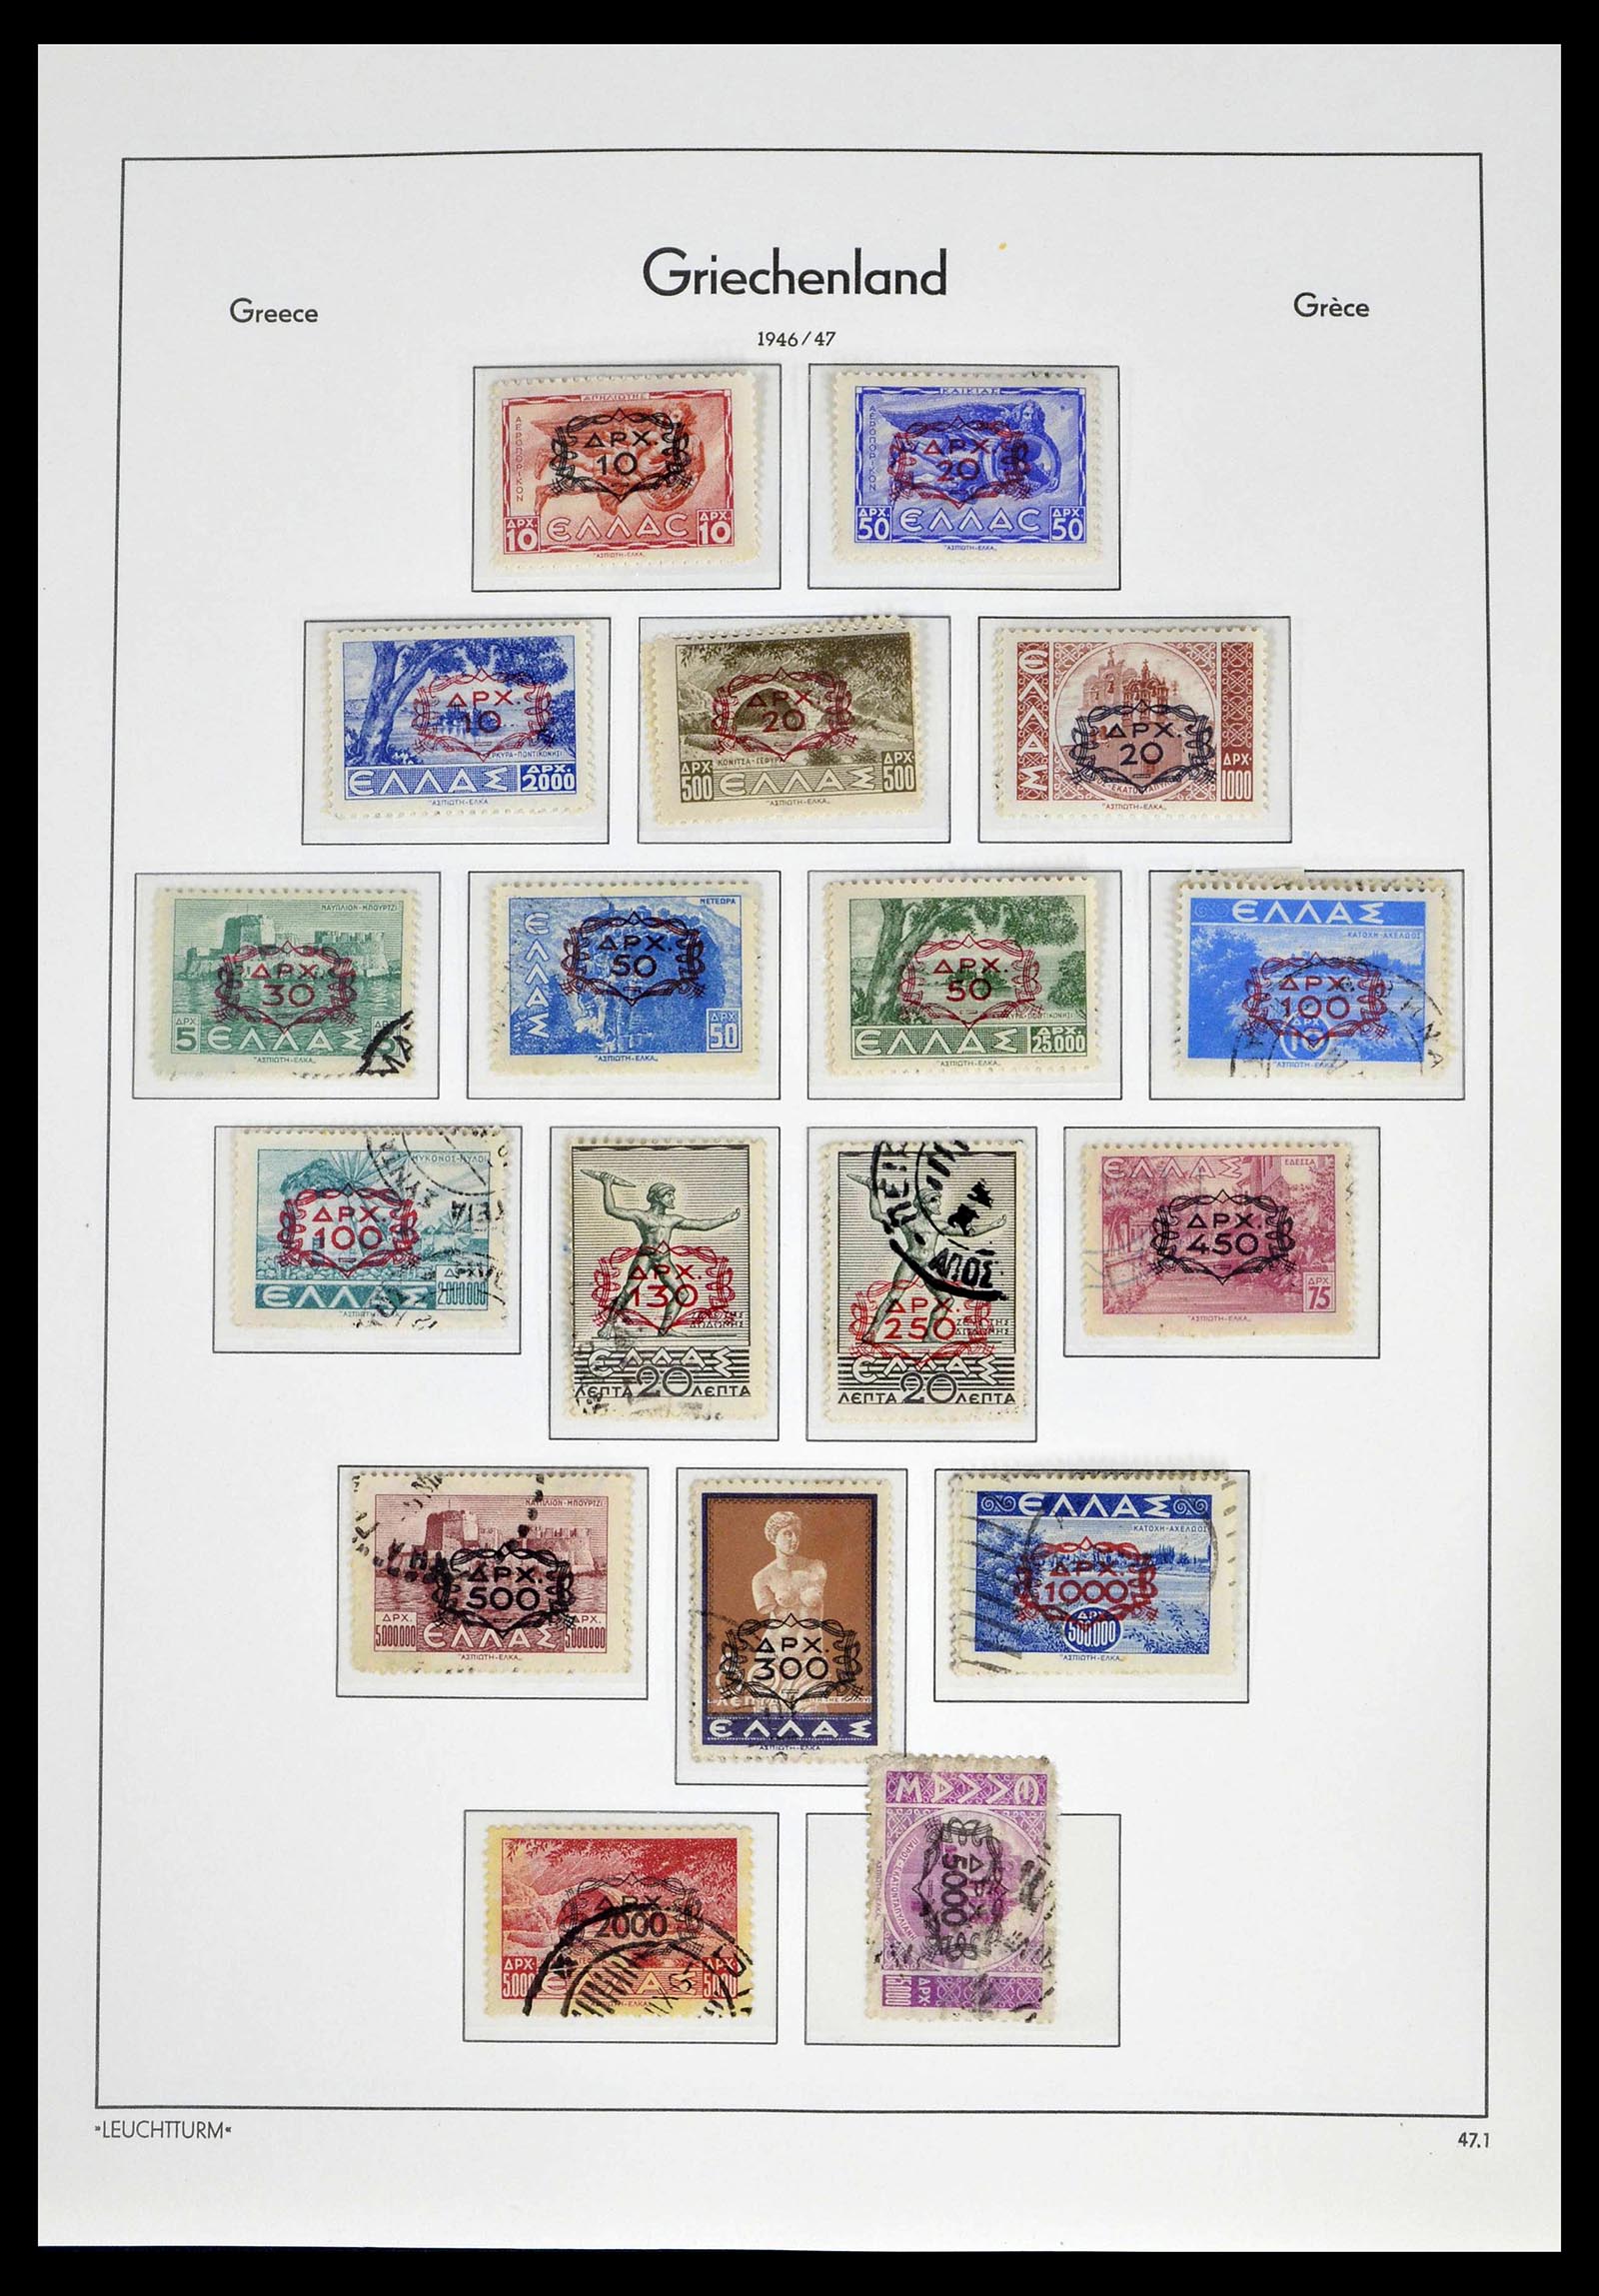 39243 0055 - Stamp collection 39243 Greece 1861-1965.